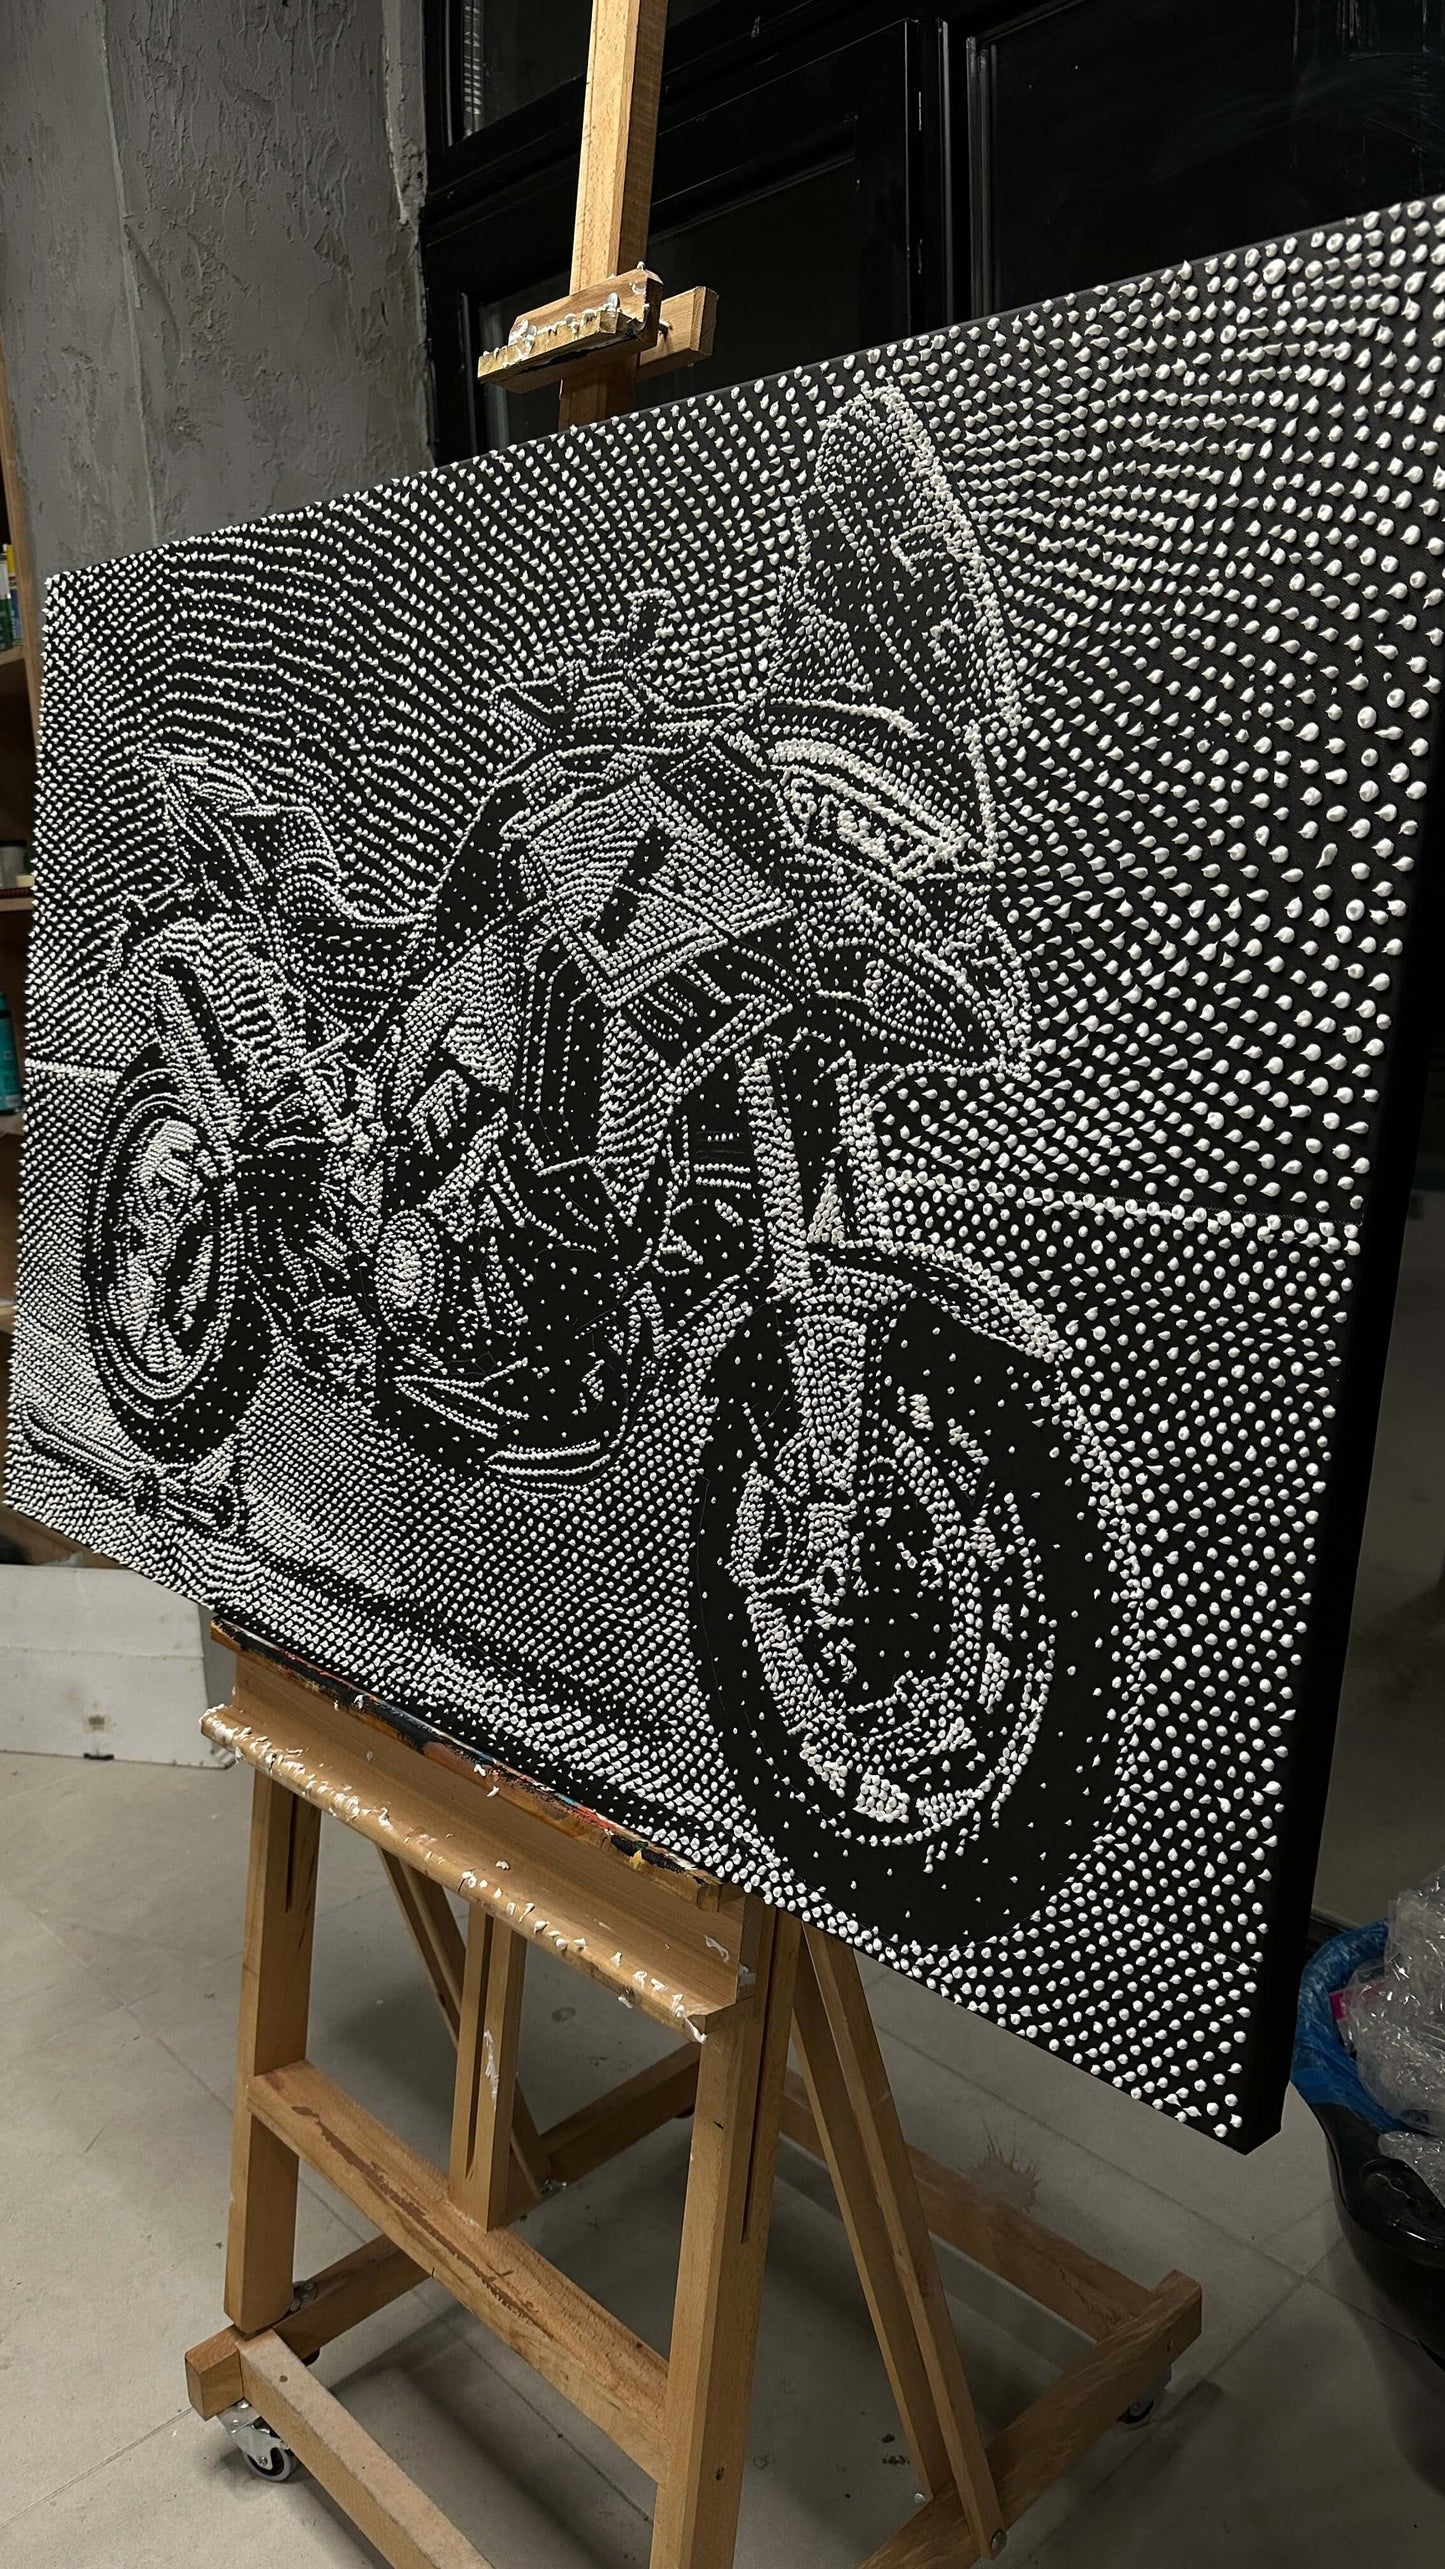 Motorcycle Canvas Print, Pointillism Techniques, Modern Art Collectibles, Custom Motorcycle Art, Bike Enthusiast Decor, Artistic Motorcycle Representation, Fine Art Motorcycle, Detailed Pointillism, Motorcycle Enthusiast Gift, Abstract Motorcycle Art